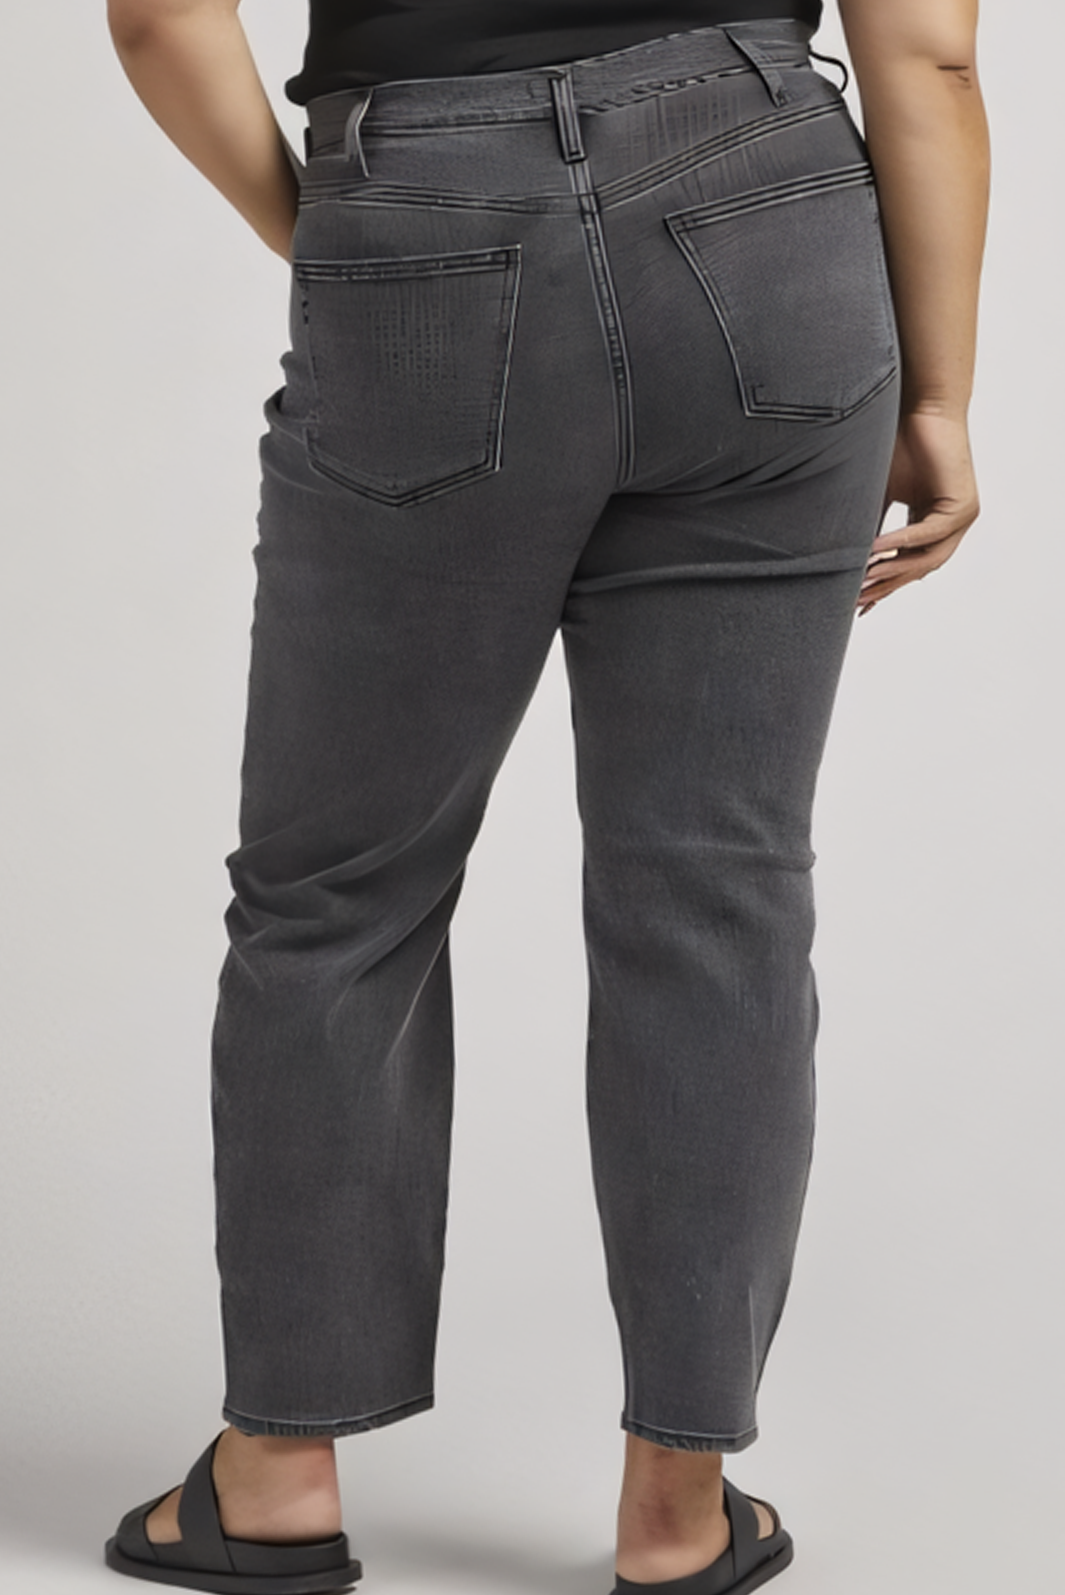 Jeans Highly Desirable Slim Straight Taille Plus de Silver Jeans